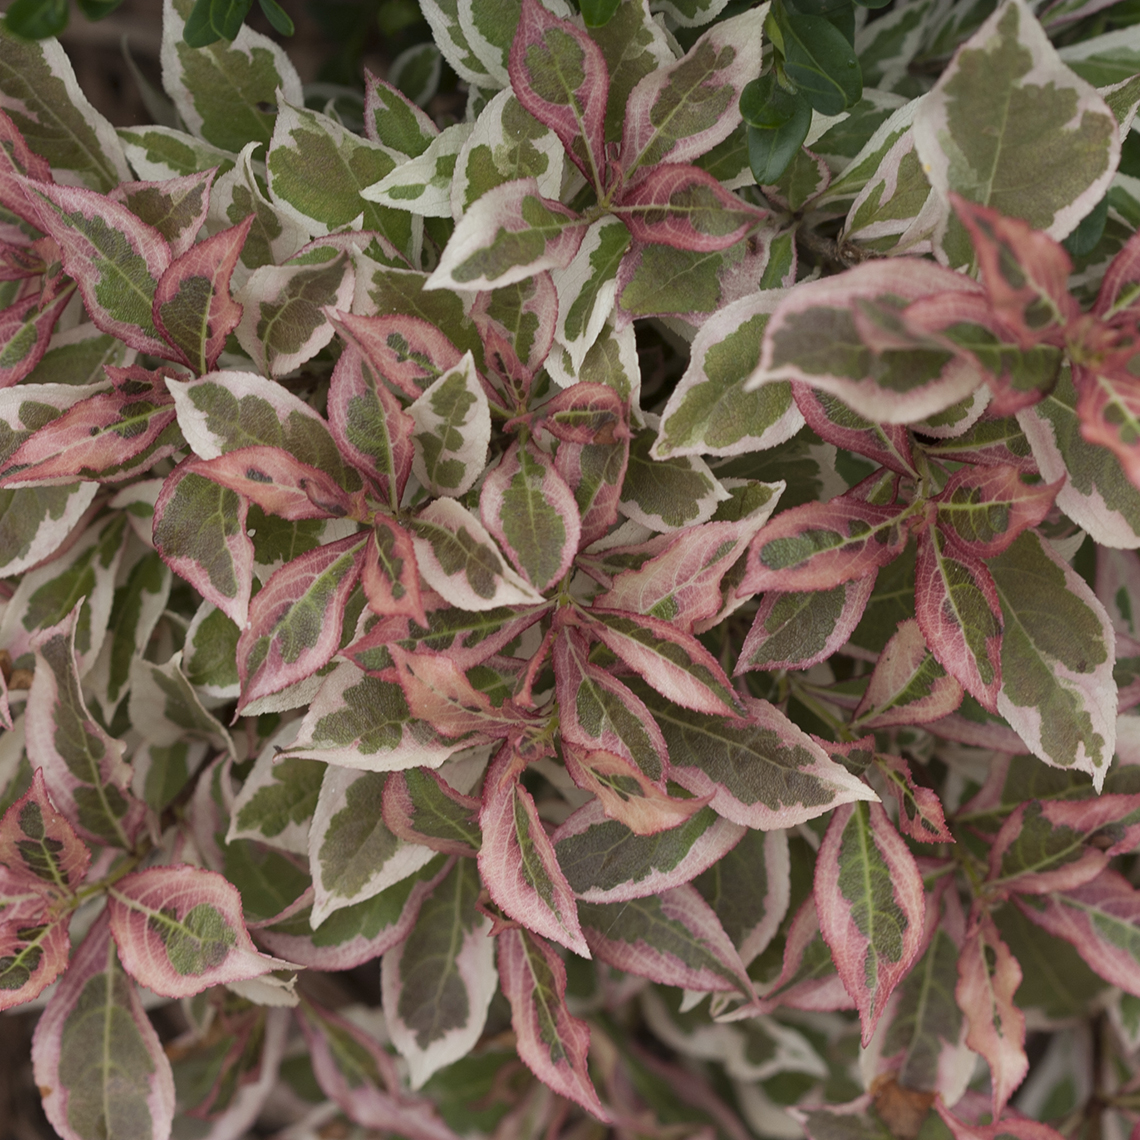 Closeup of the variegated foliage of My Monet weigela which emerges pink and takes on pink tones in cool weather